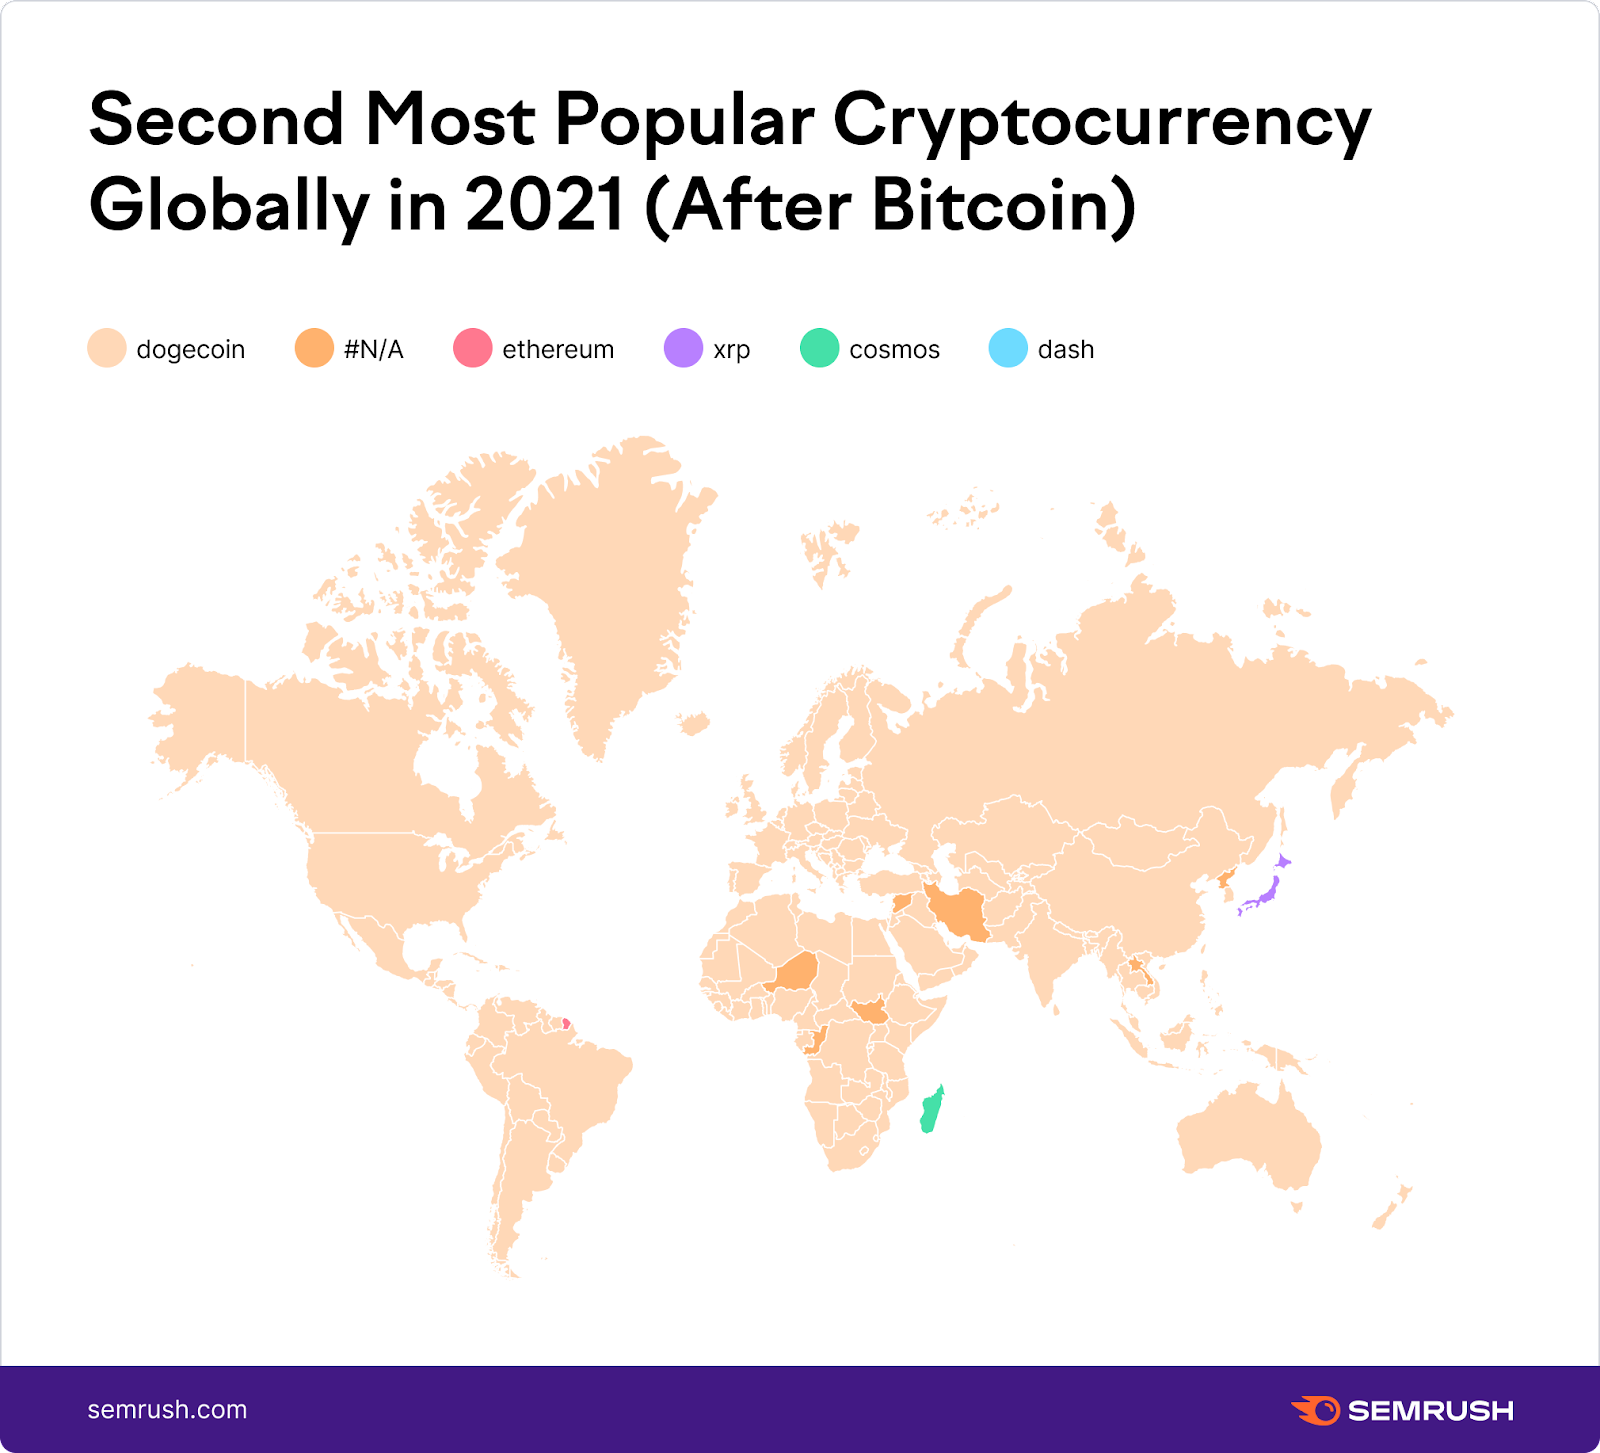 "Second Most Popular Cryptocurrency Globally in 2021 (After Bitcoin)" infographic